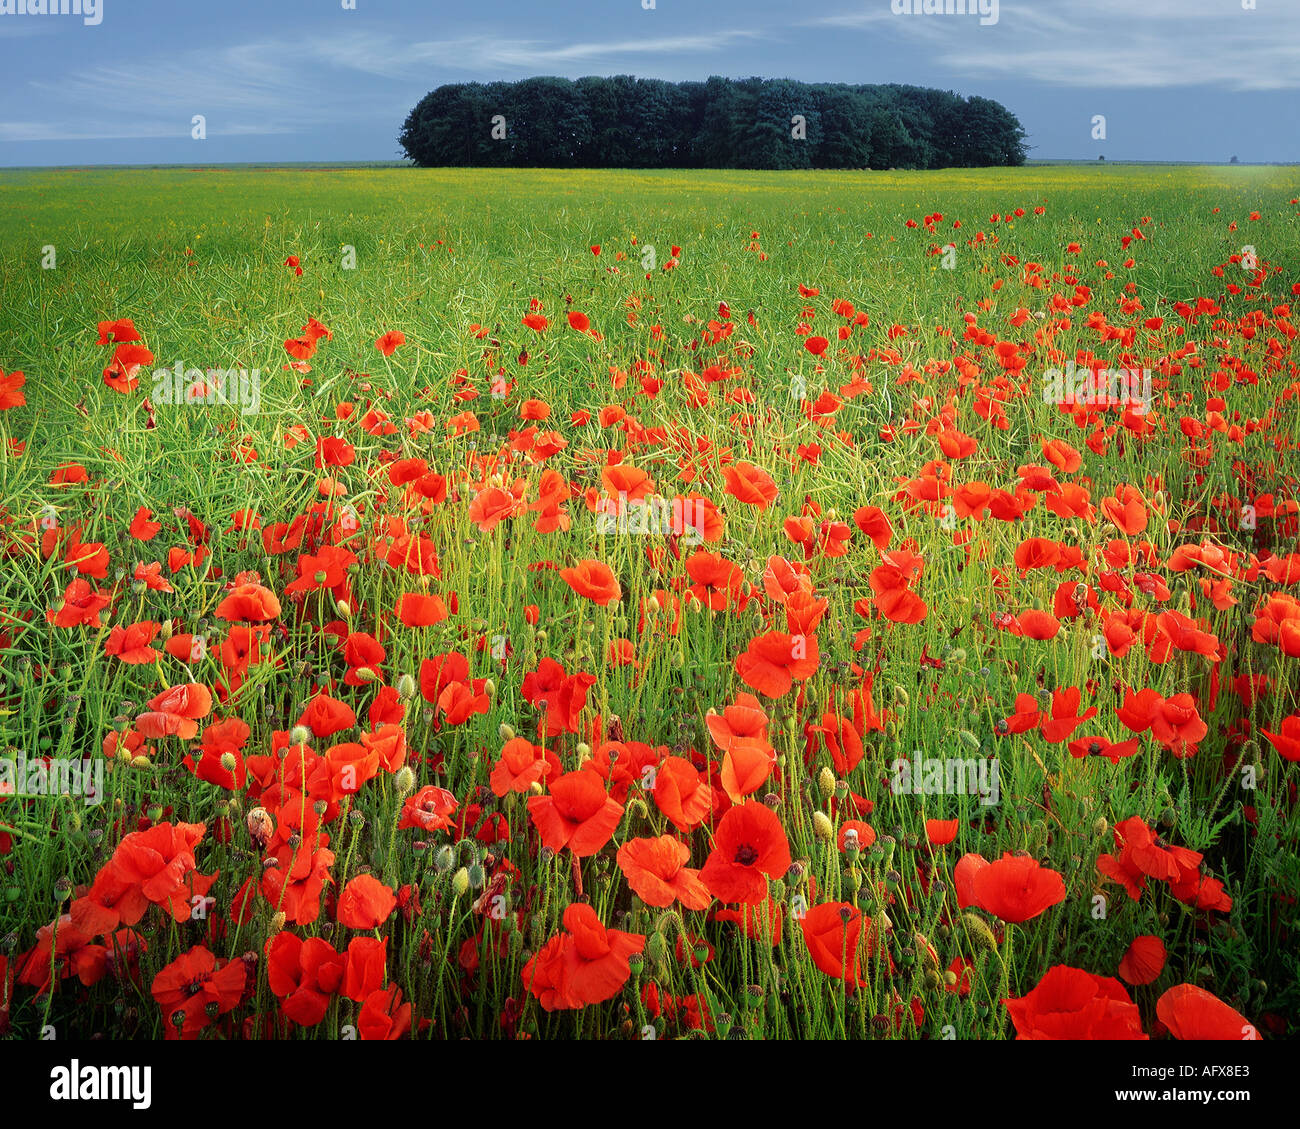 GB - GLOUCESTERSHIRE: Bereich der Mohn in den Cotswolds Stockfoto